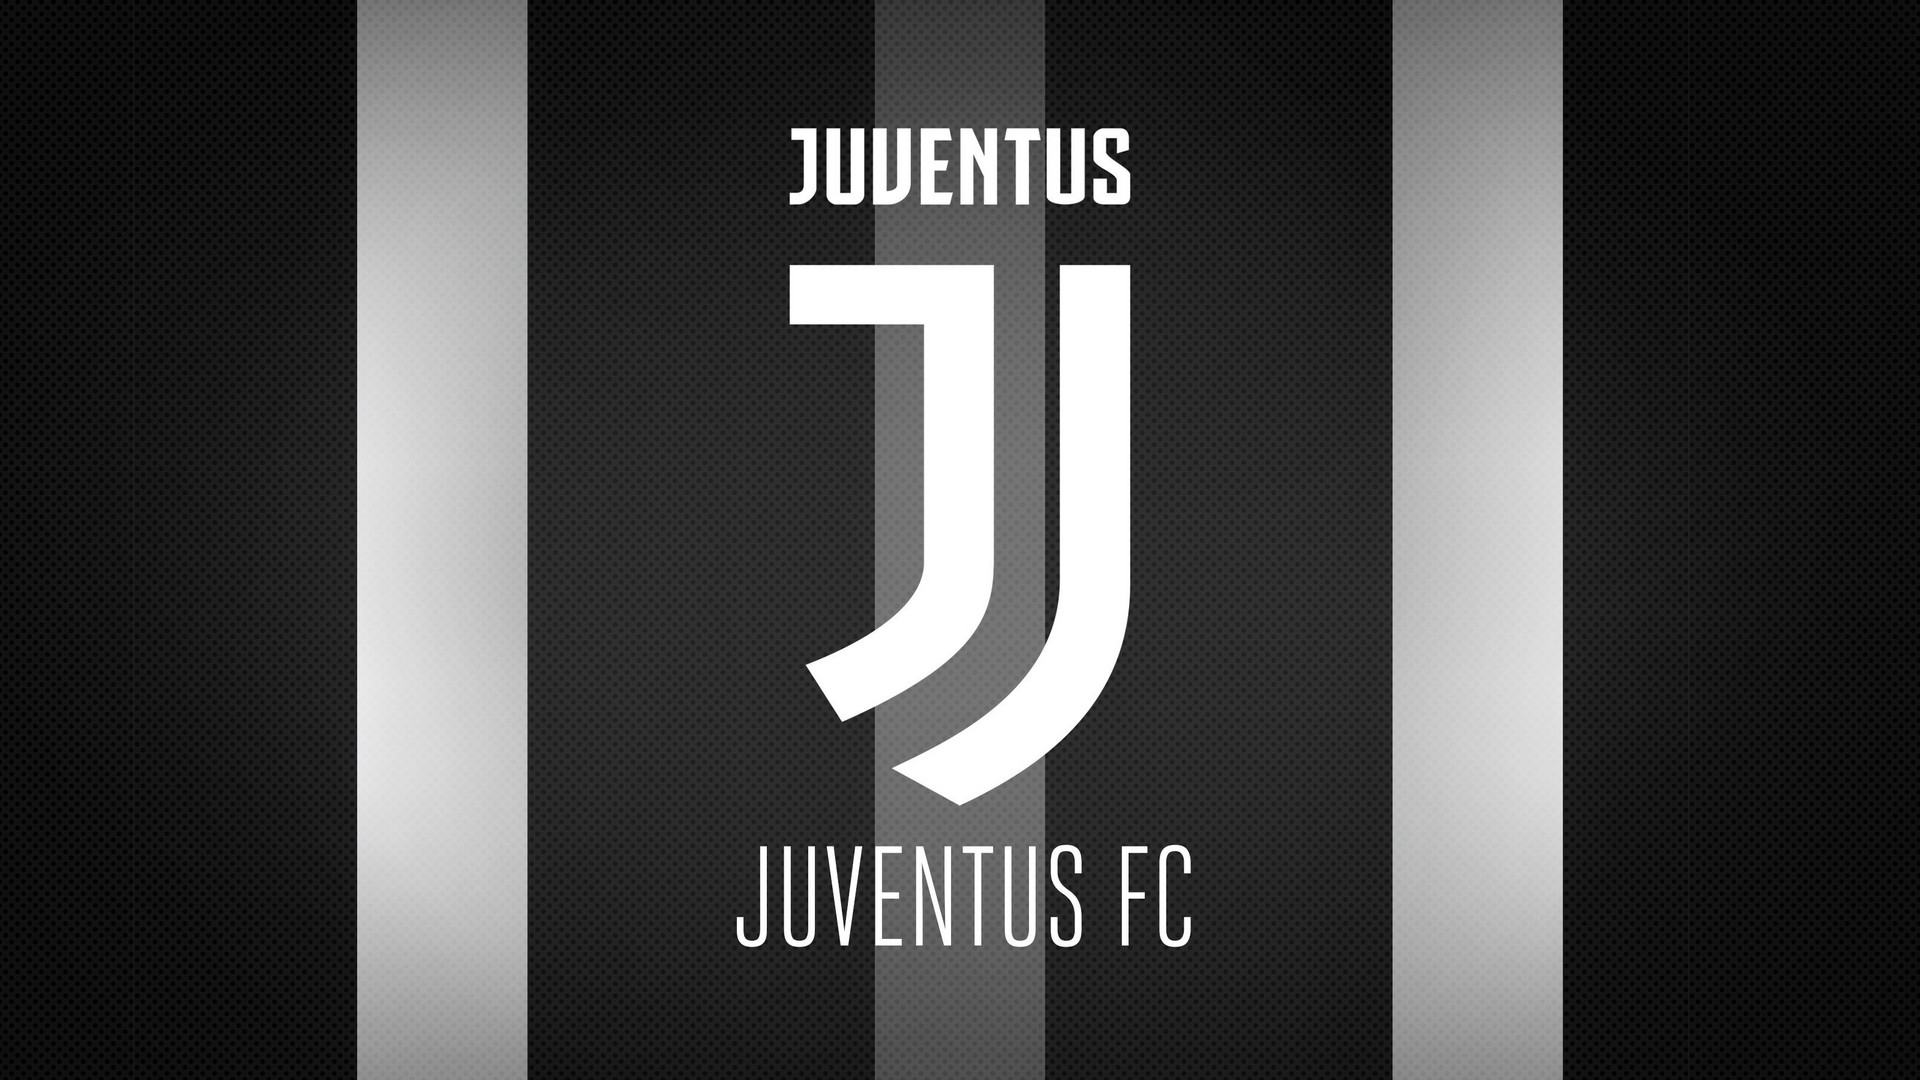 Wallpapers HD Juventus With Resolution 1920X1080 pixel. You can make this wallpaper for your Mac or Windows Desktop Background, iPhone, Android or Tablet and another Smartphone device for free